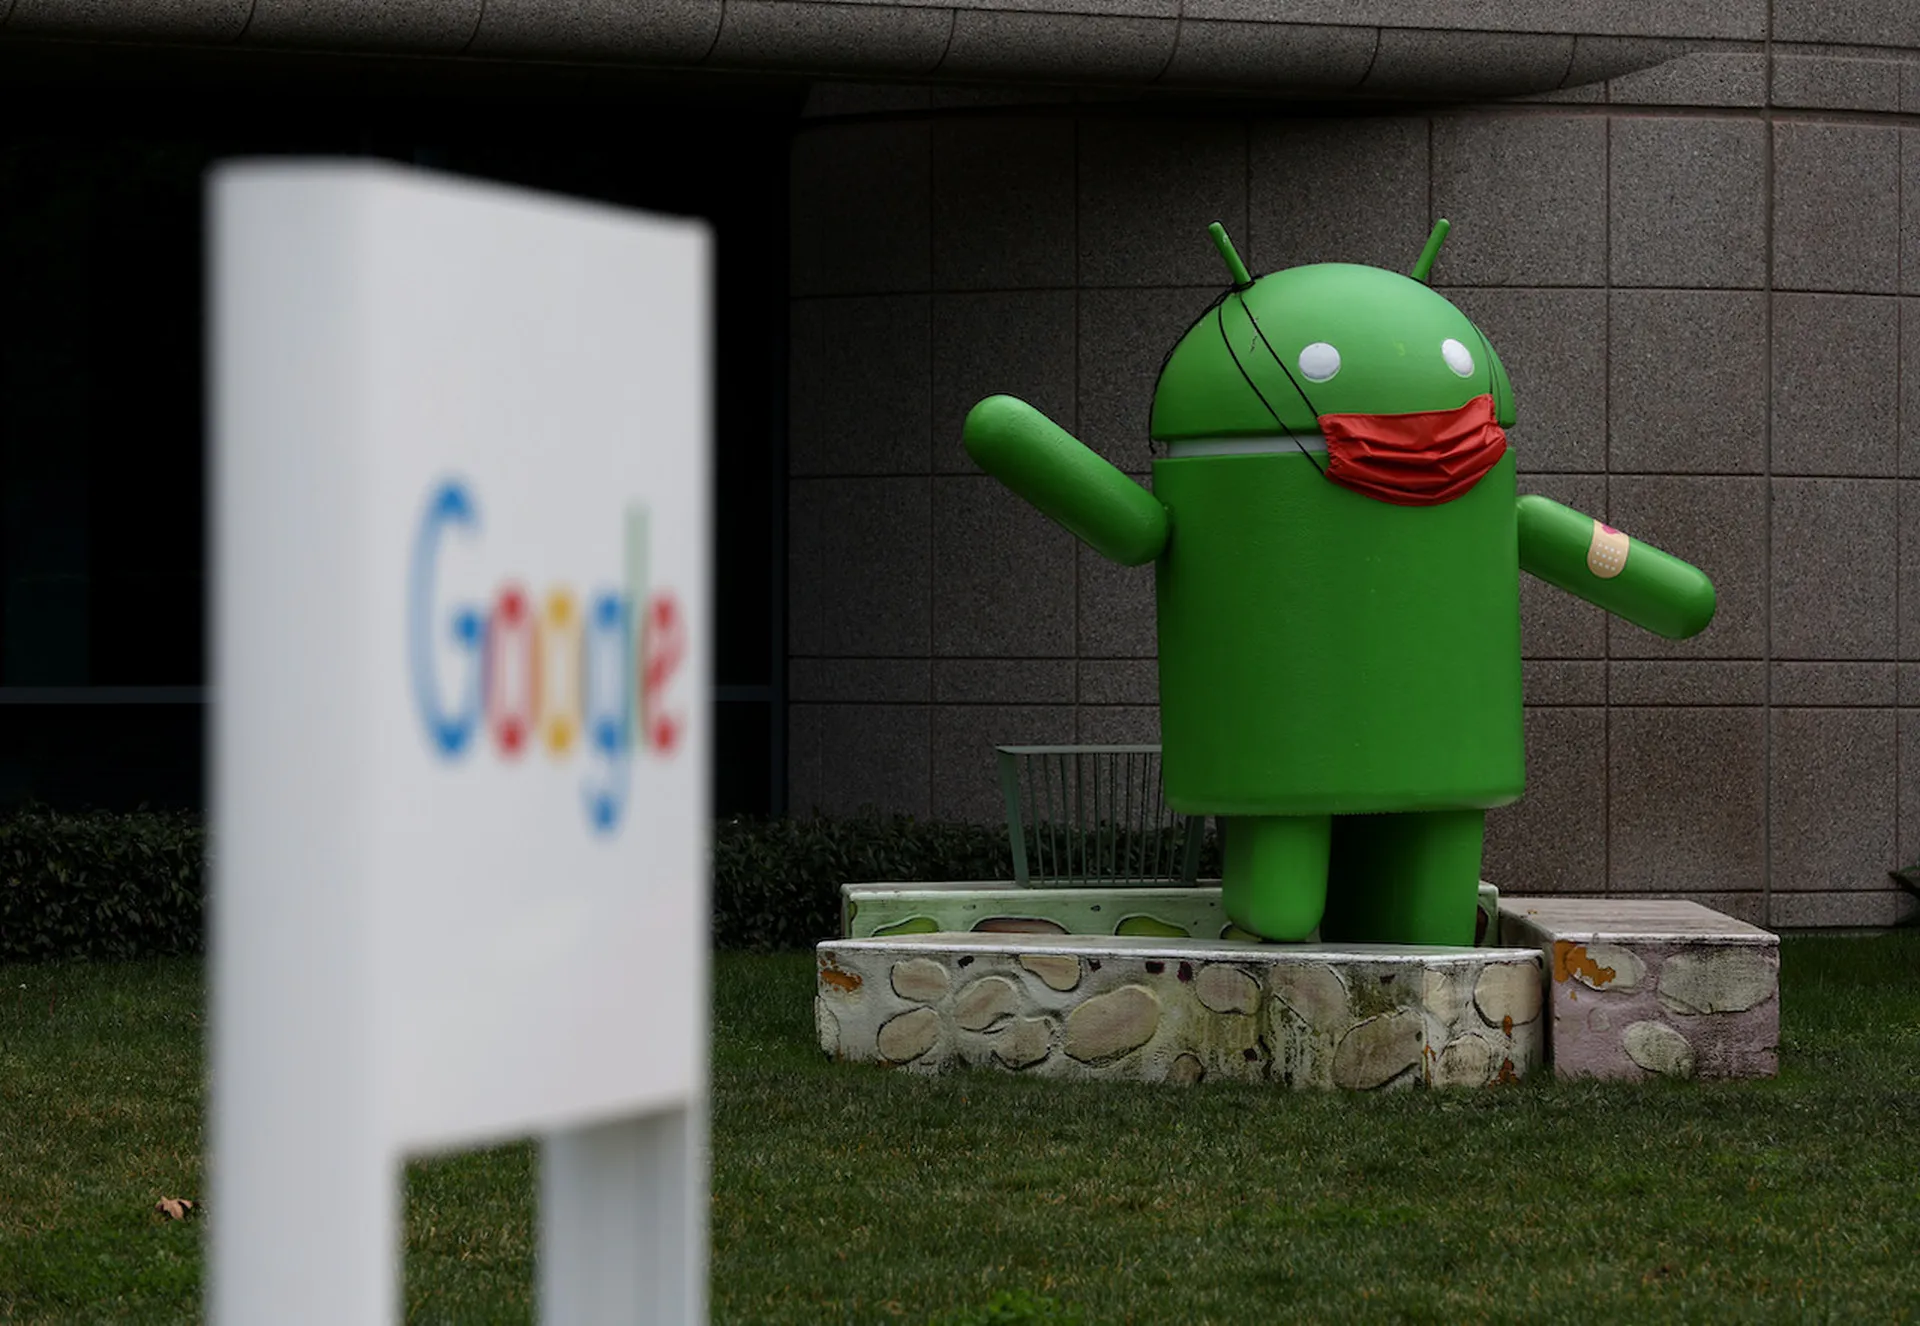 An Android statue is displayed in front of a building on the Google campus on January 31, 2022 in Mountain View, California. (Photo by Justin Sullivan/Getty Images)